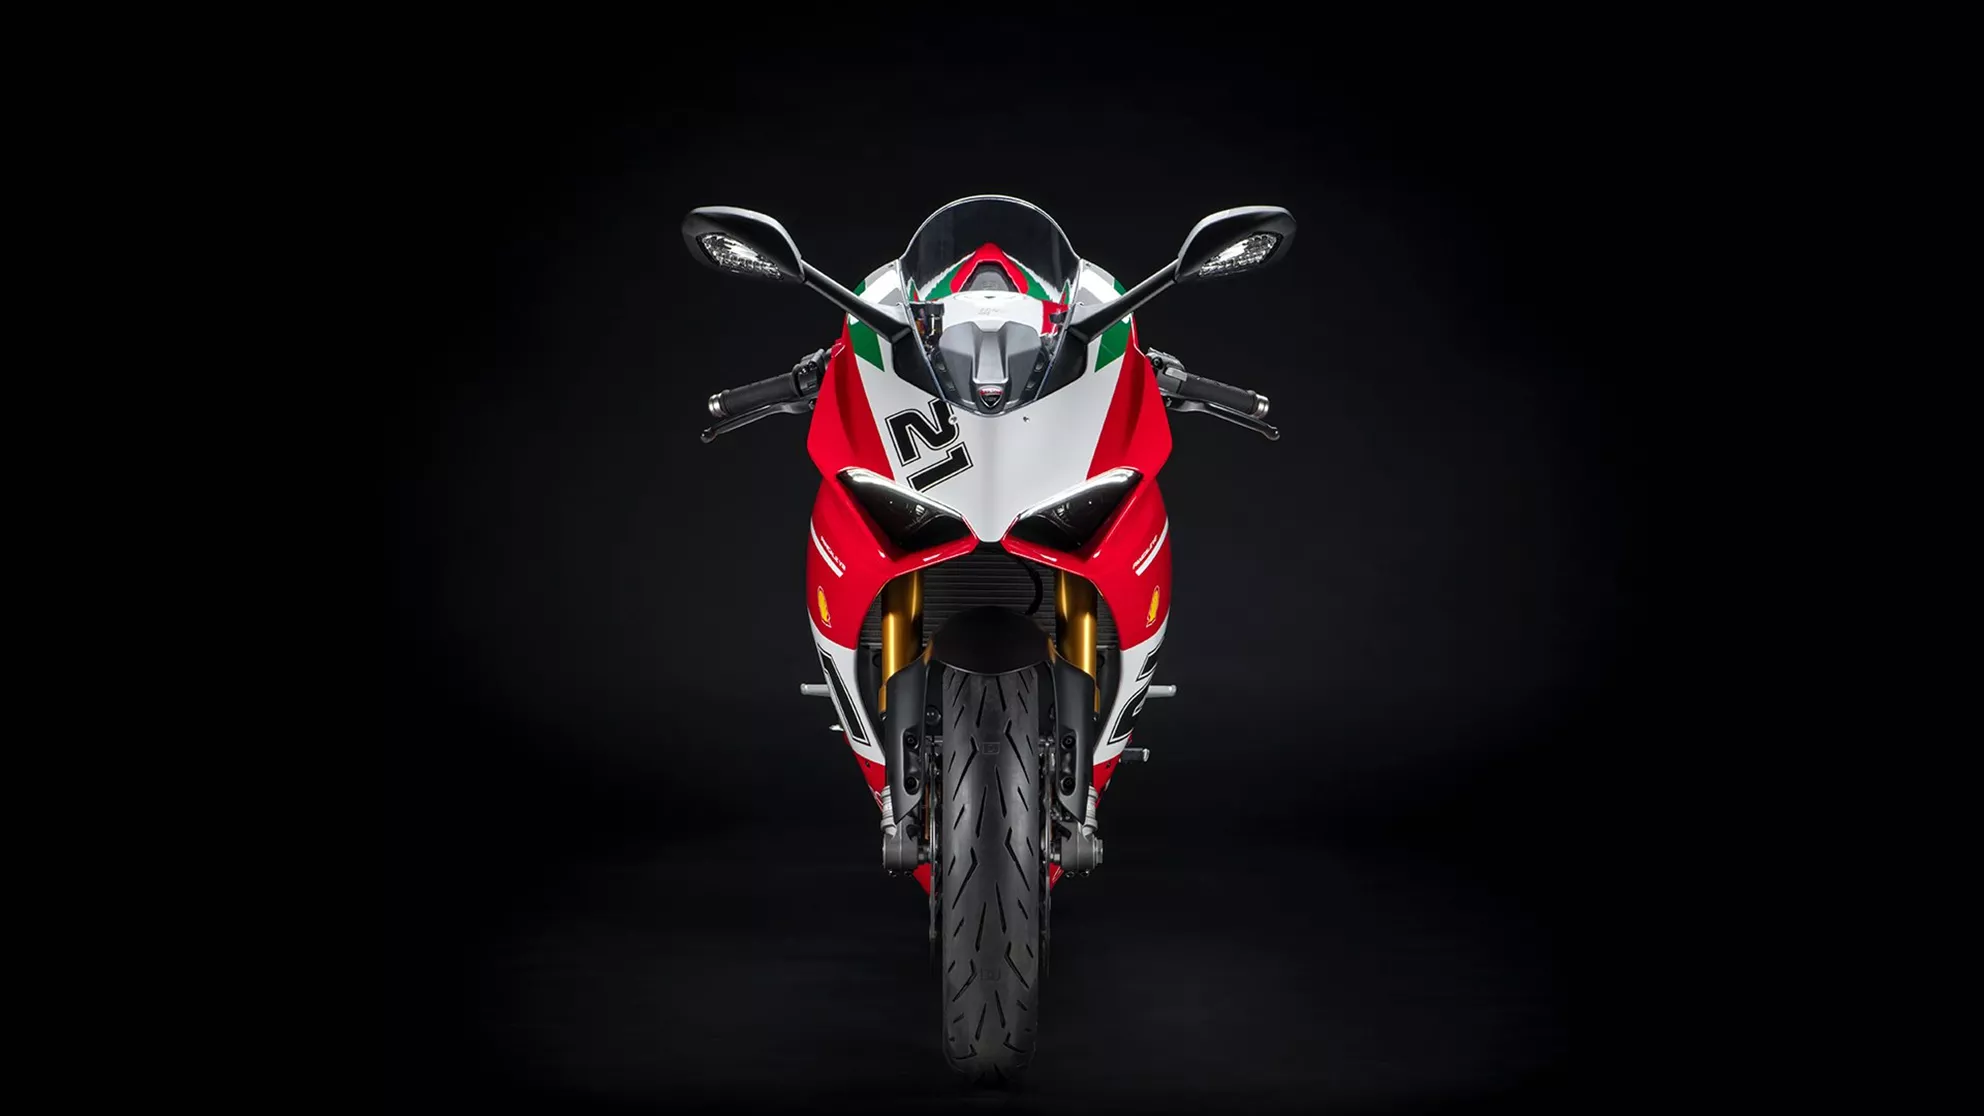 Ducati Panigale V2 Bayliss Edition - Immagine 4